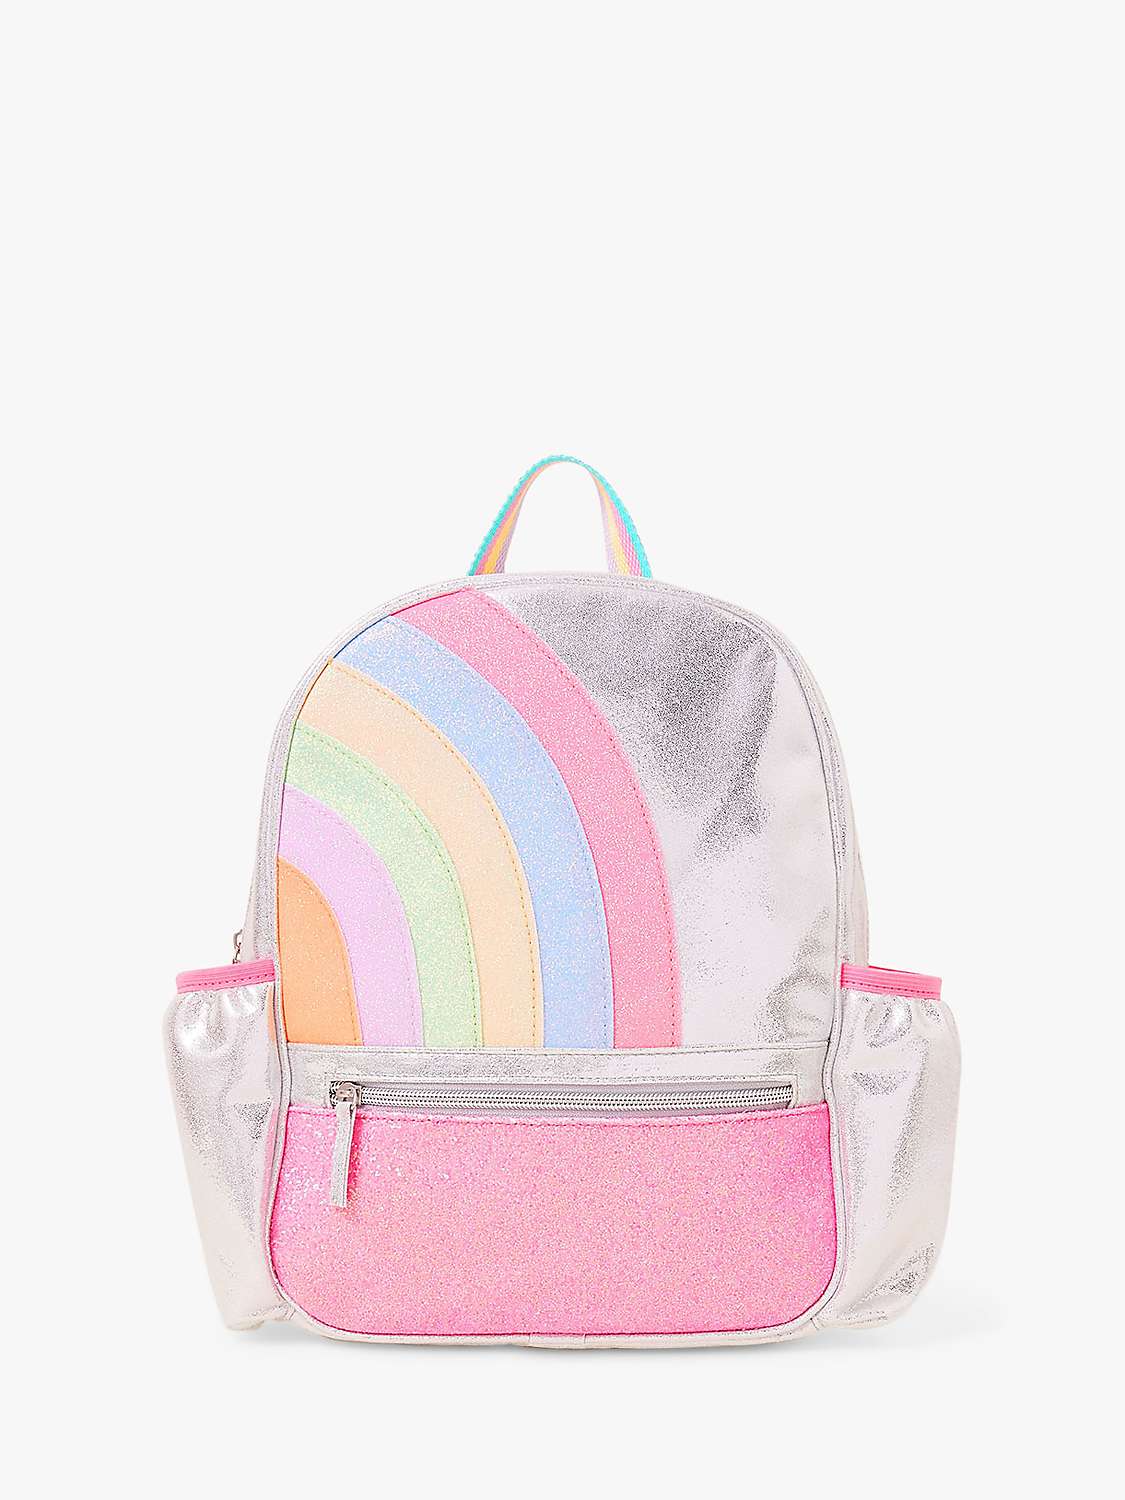 Buy Angels by Accessorize Kids' Rainbow Stripe Backpack, Multi Online at johnlewis.com